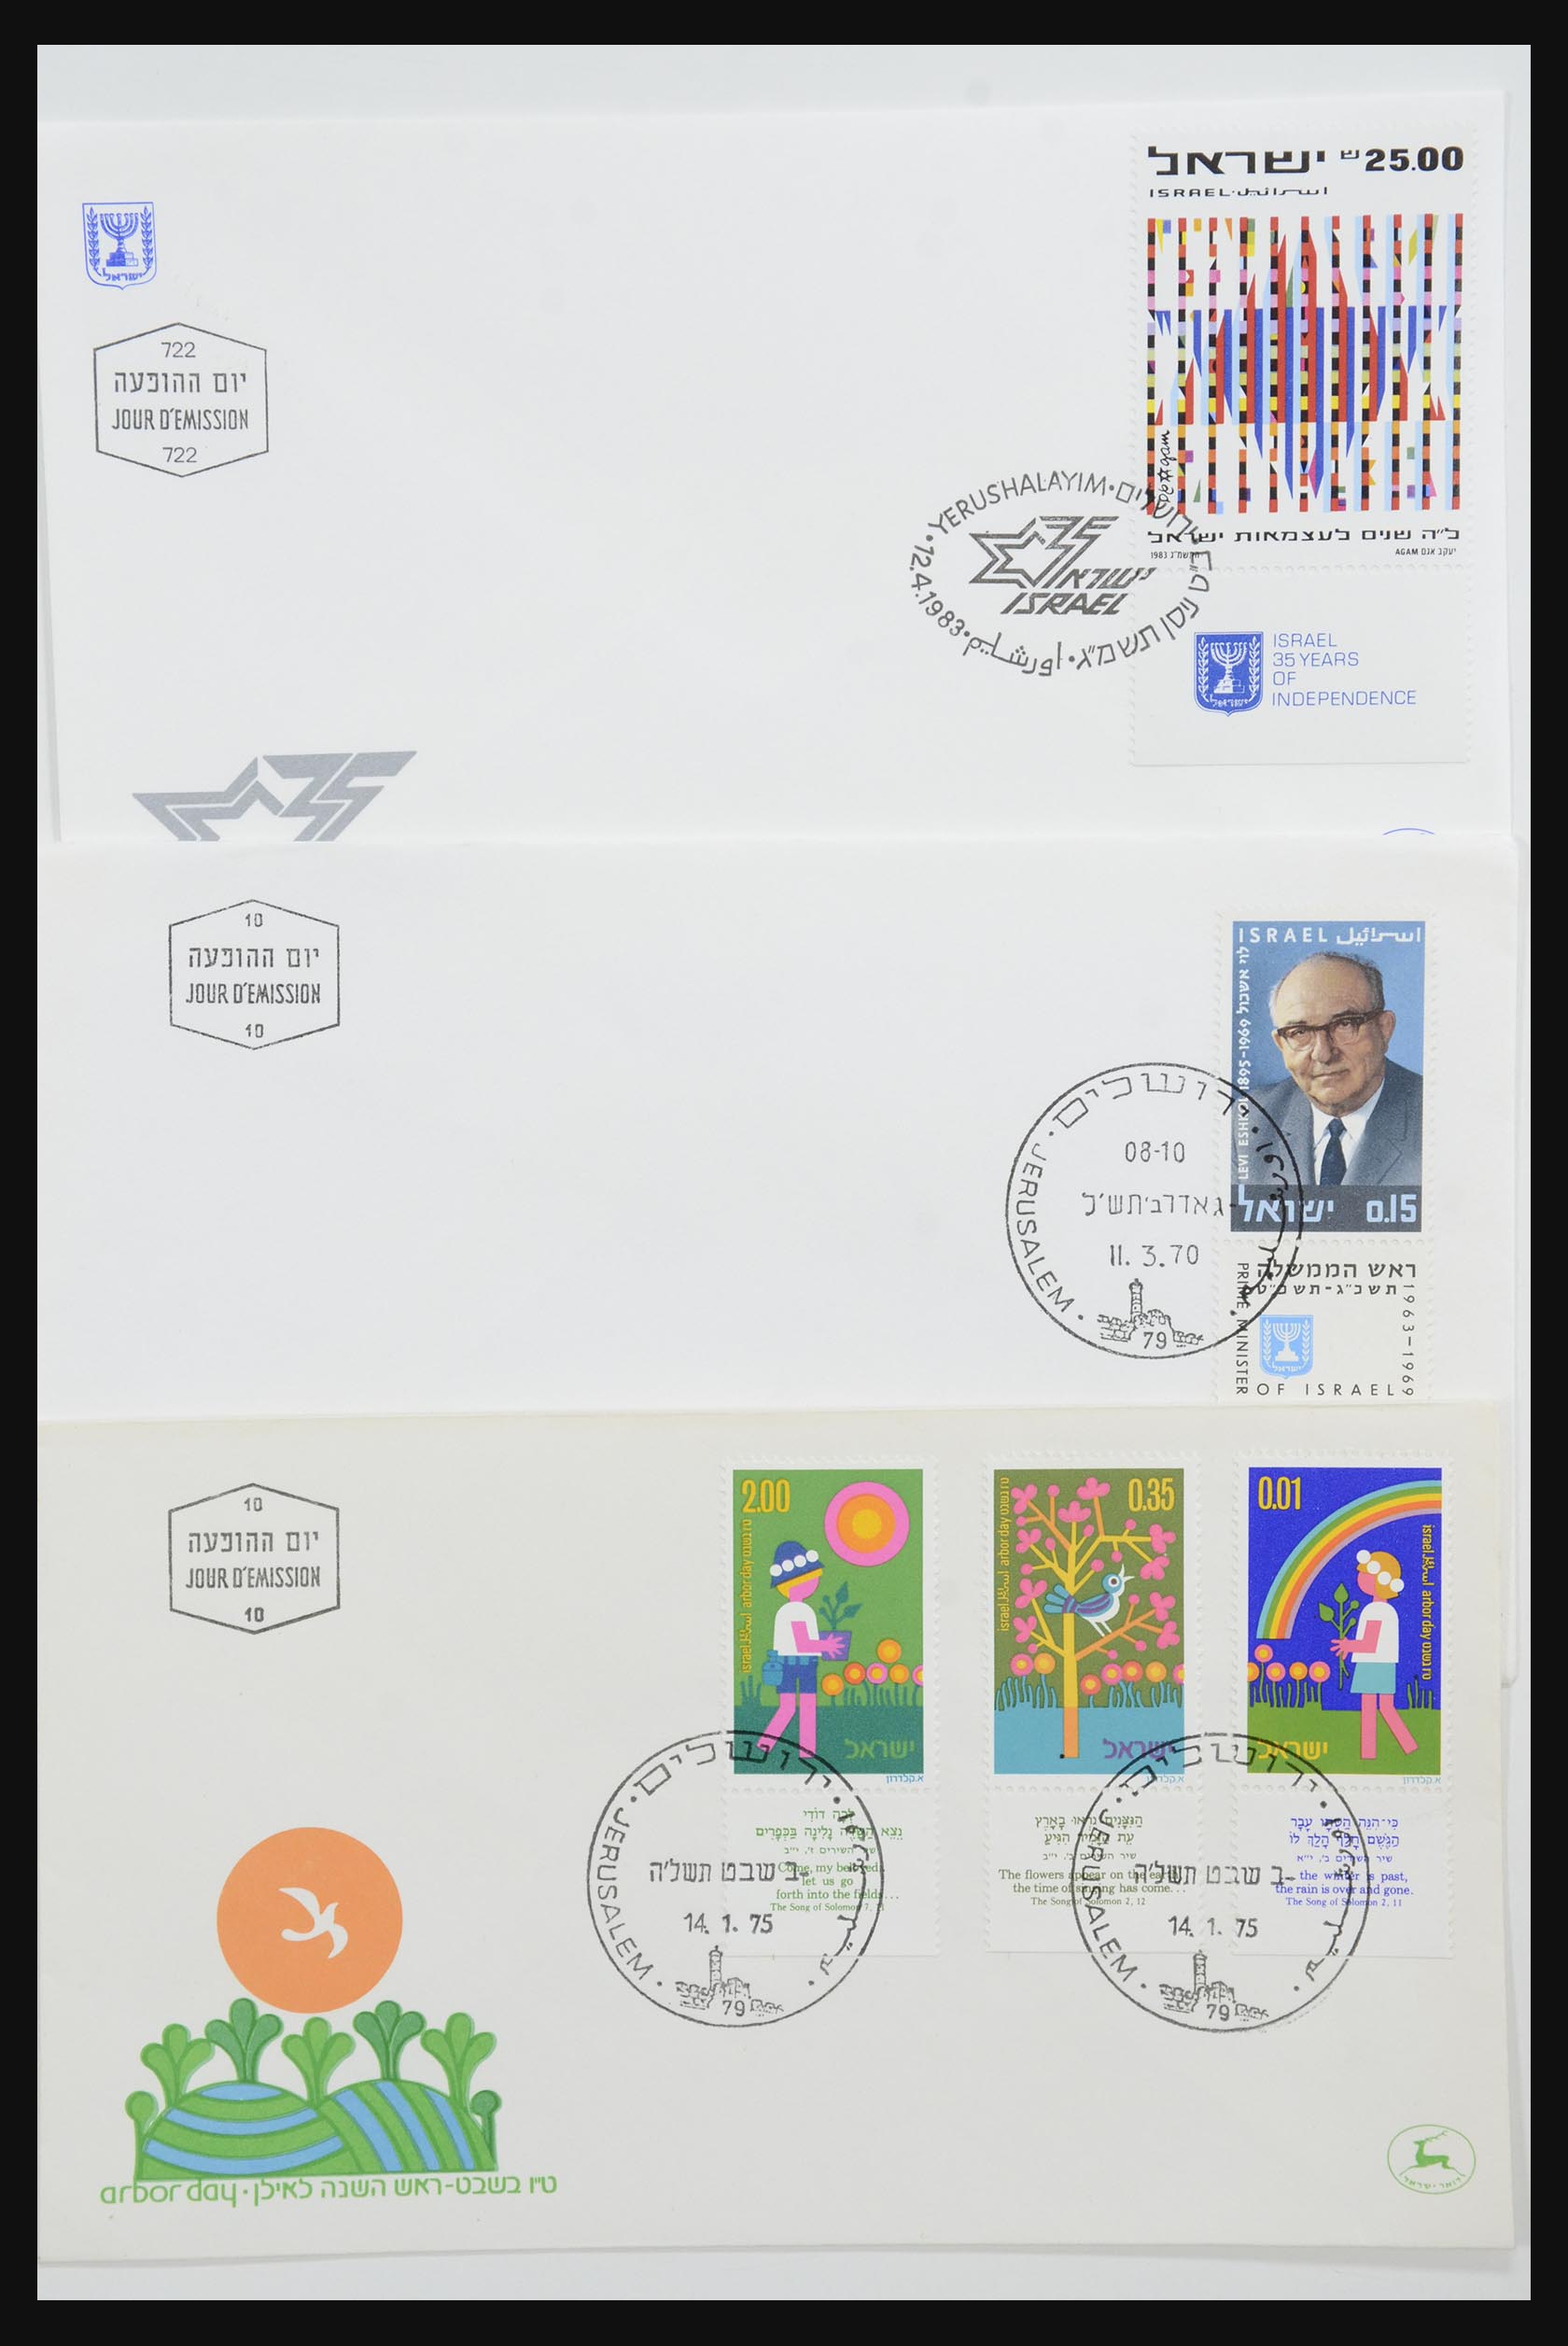 31924 008 - 31924 Israel first day cover collection 1957-2003.